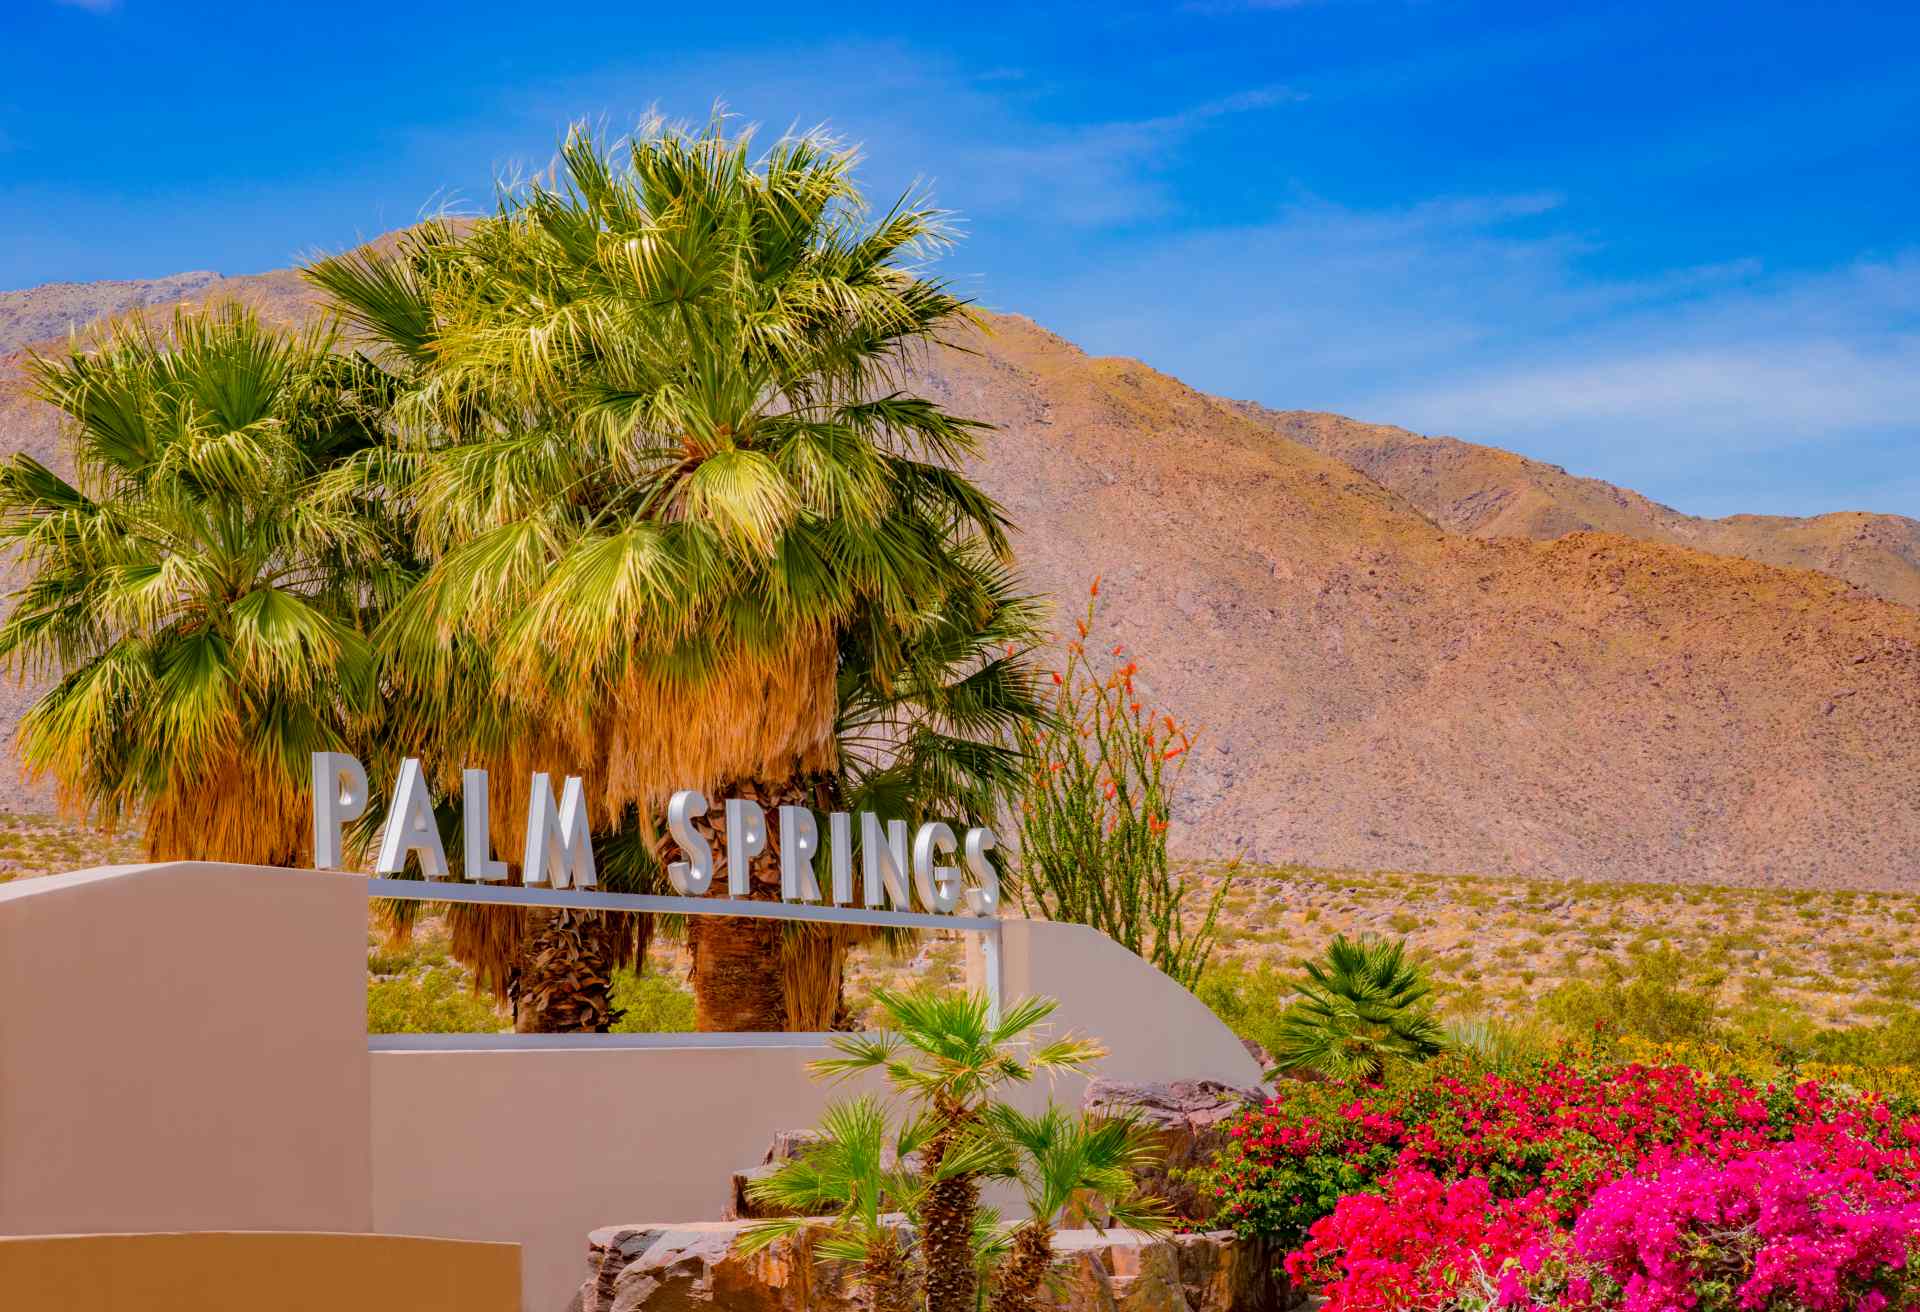 Bougainvilleas and palm trees at entrance sign in Palm Springs, California (P)